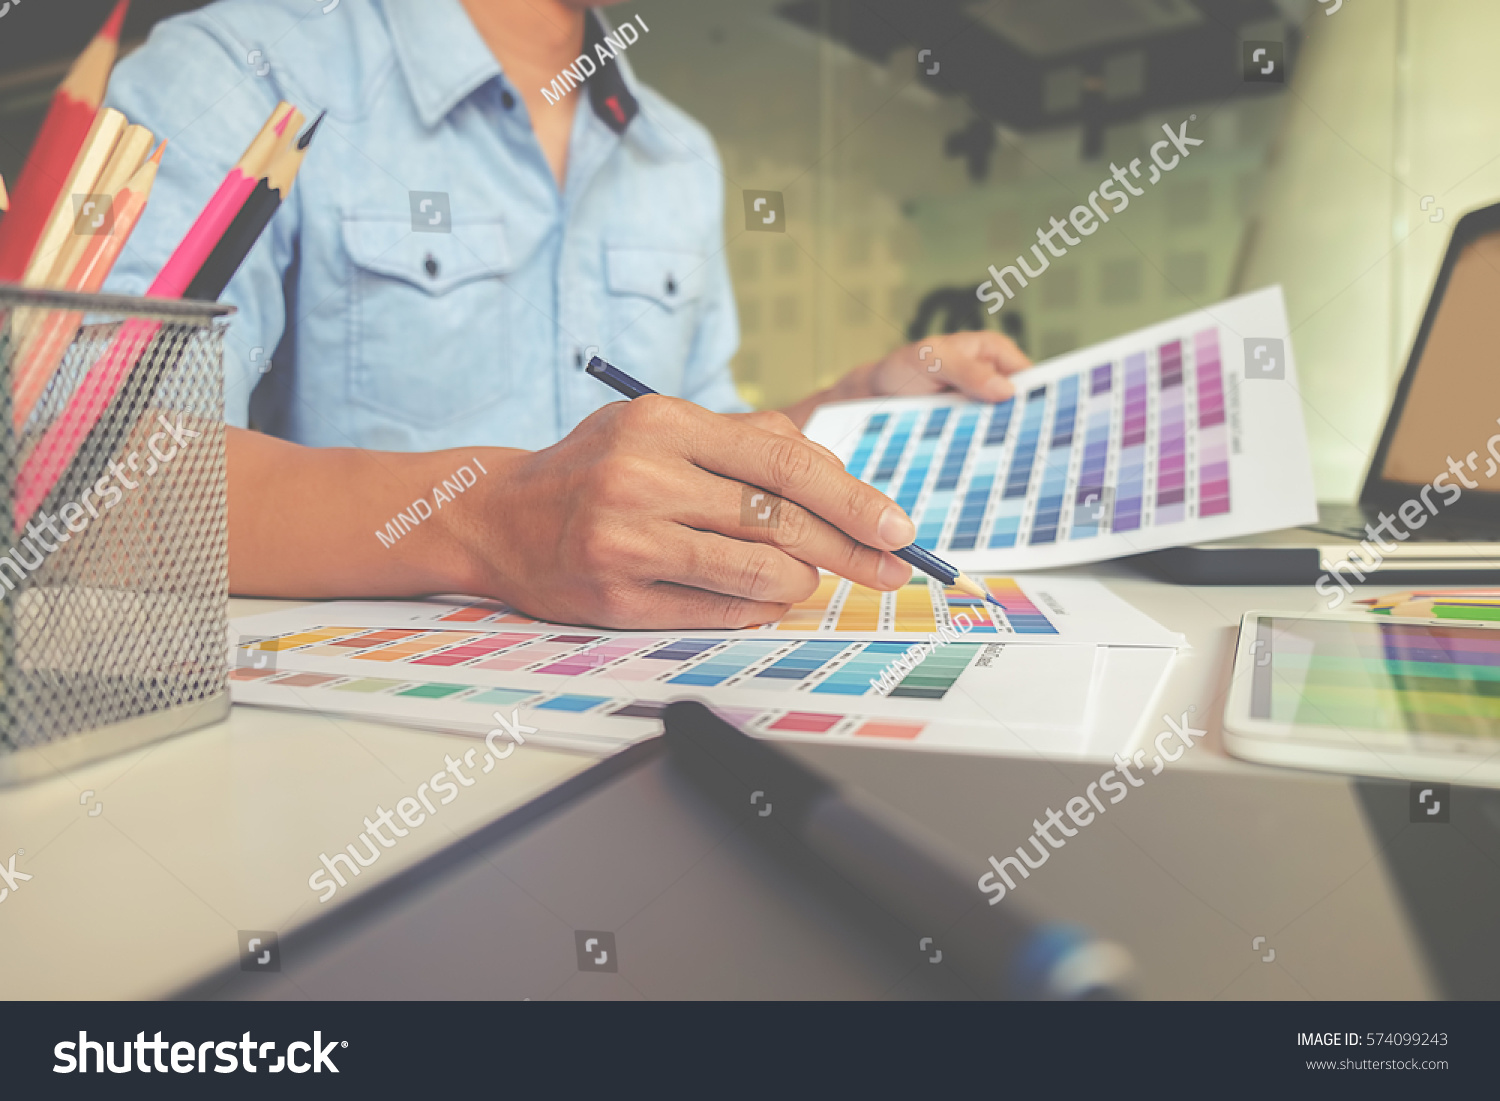 Graphic design and color swatches and pens on a desk. Architectural drawing with work tools and accessories. #574099243